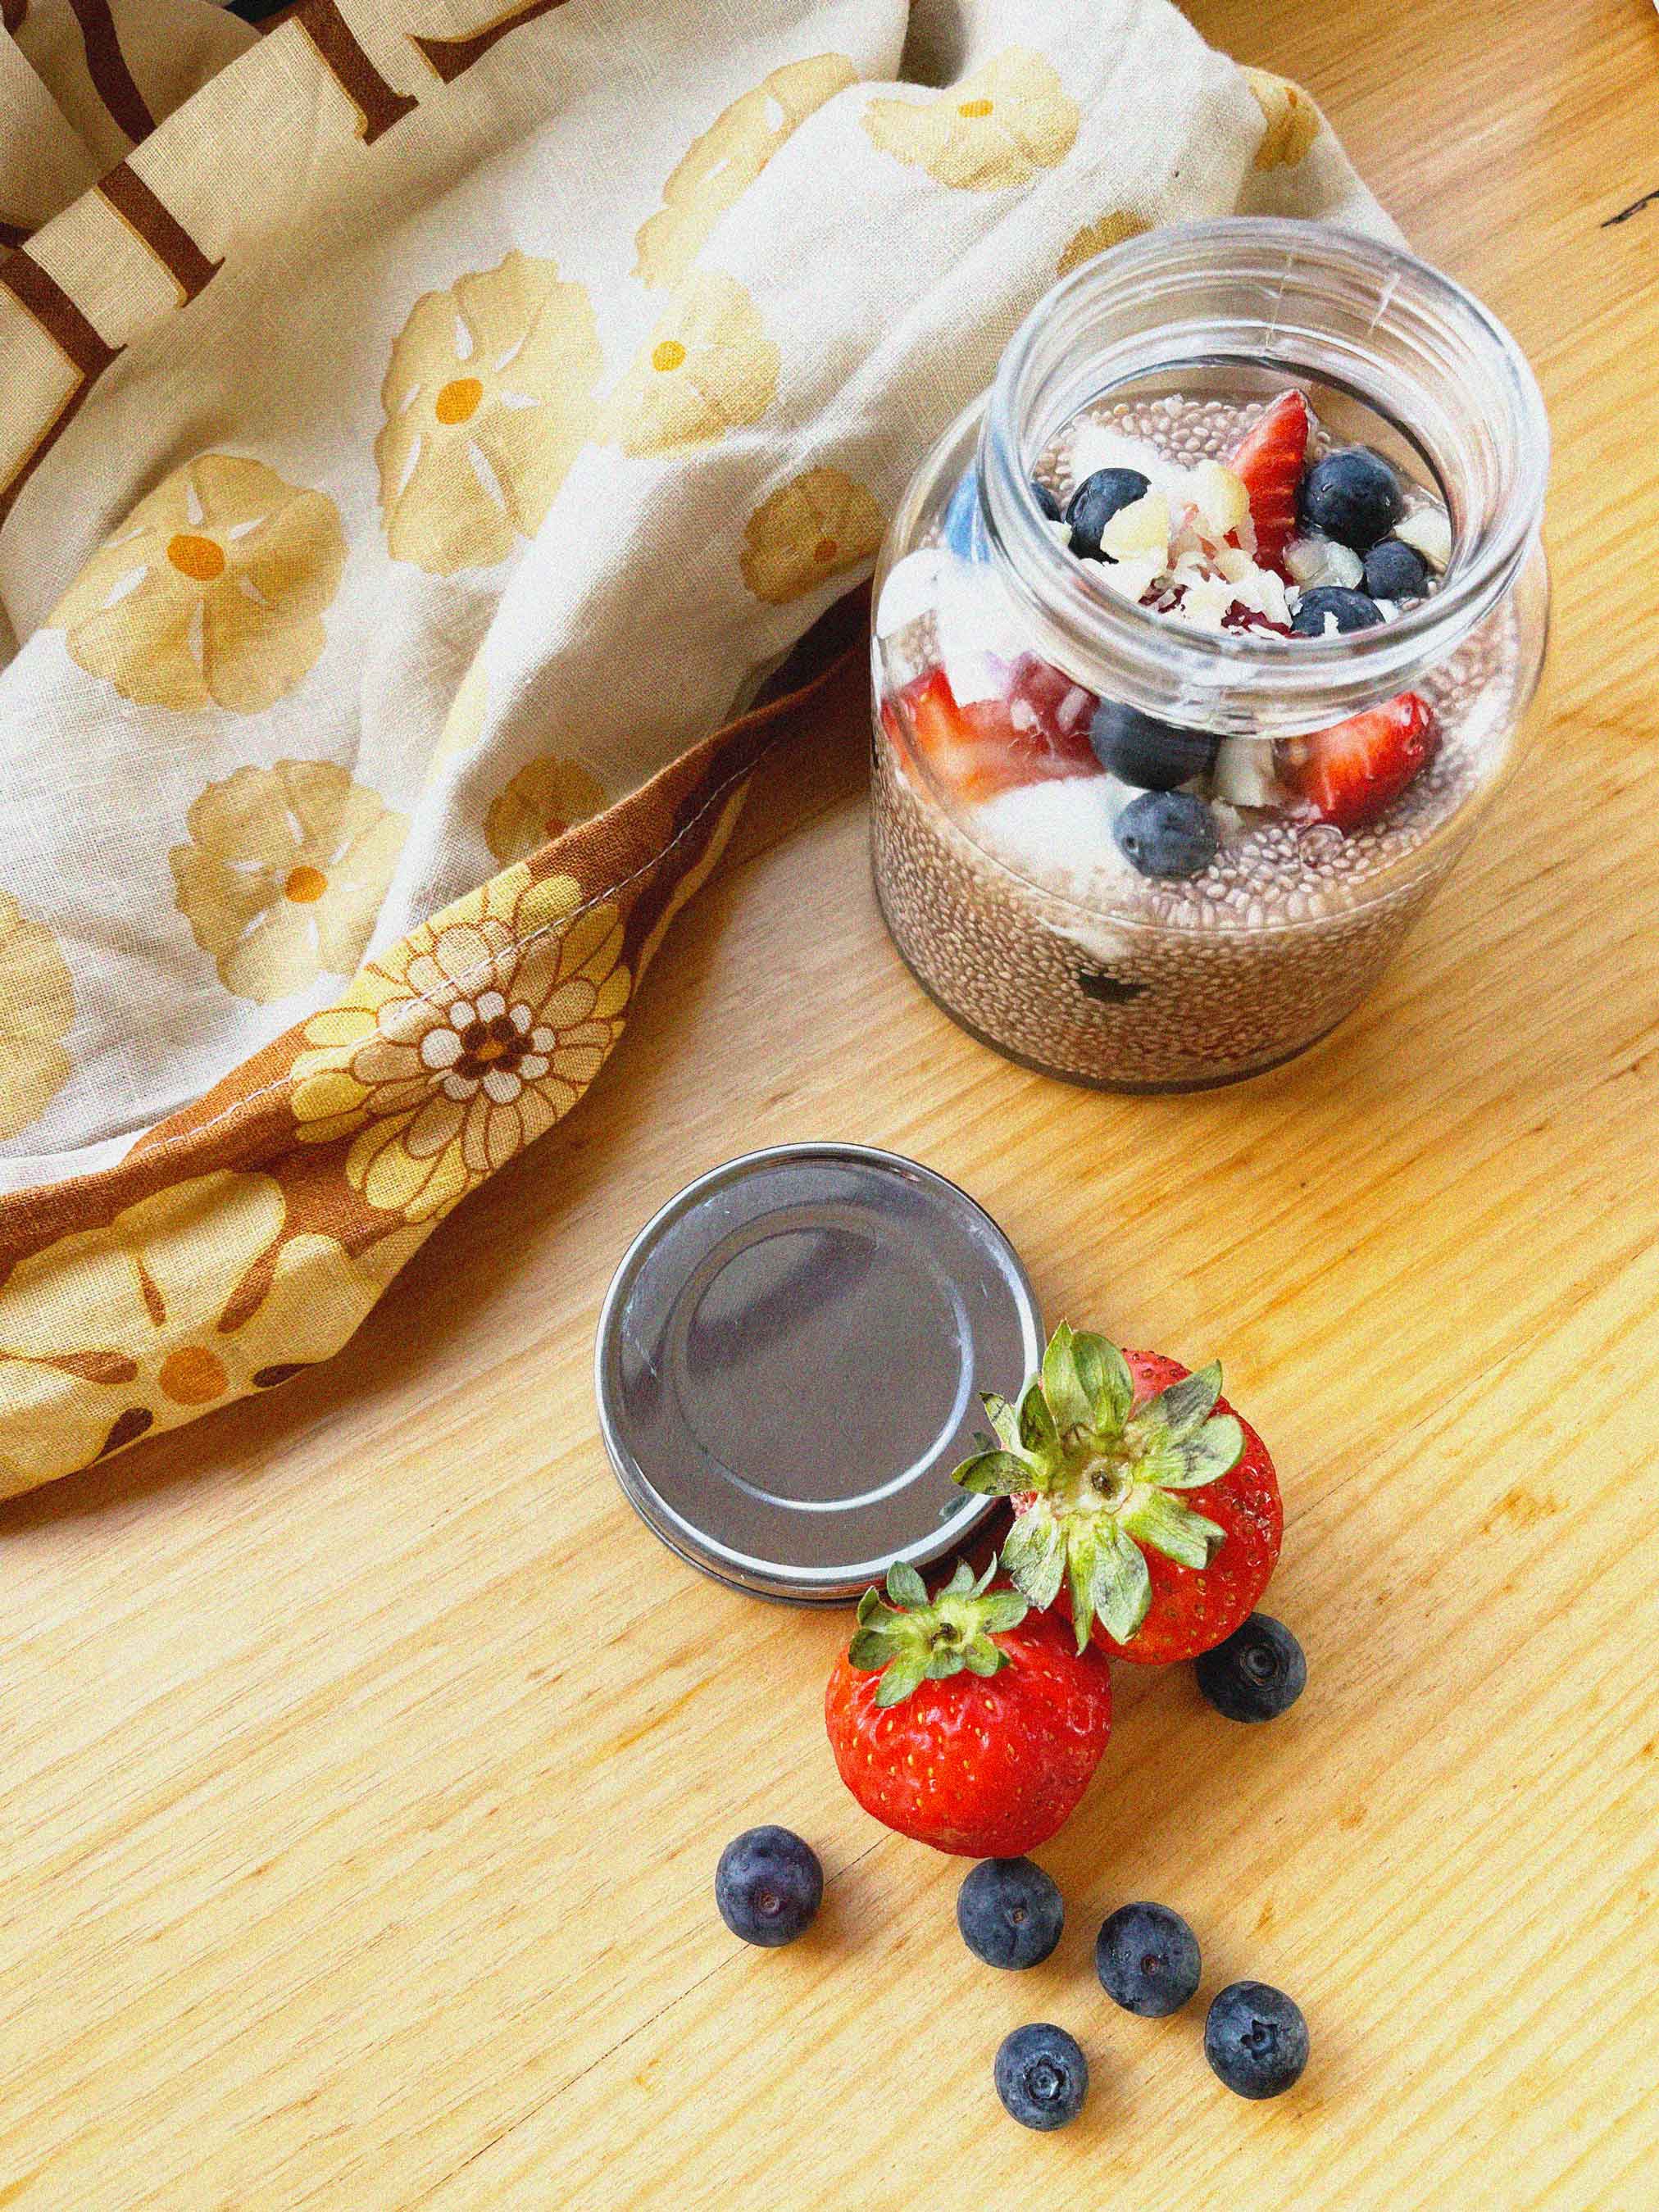 The Brightside: The Tastiest Chia Seed Pudding